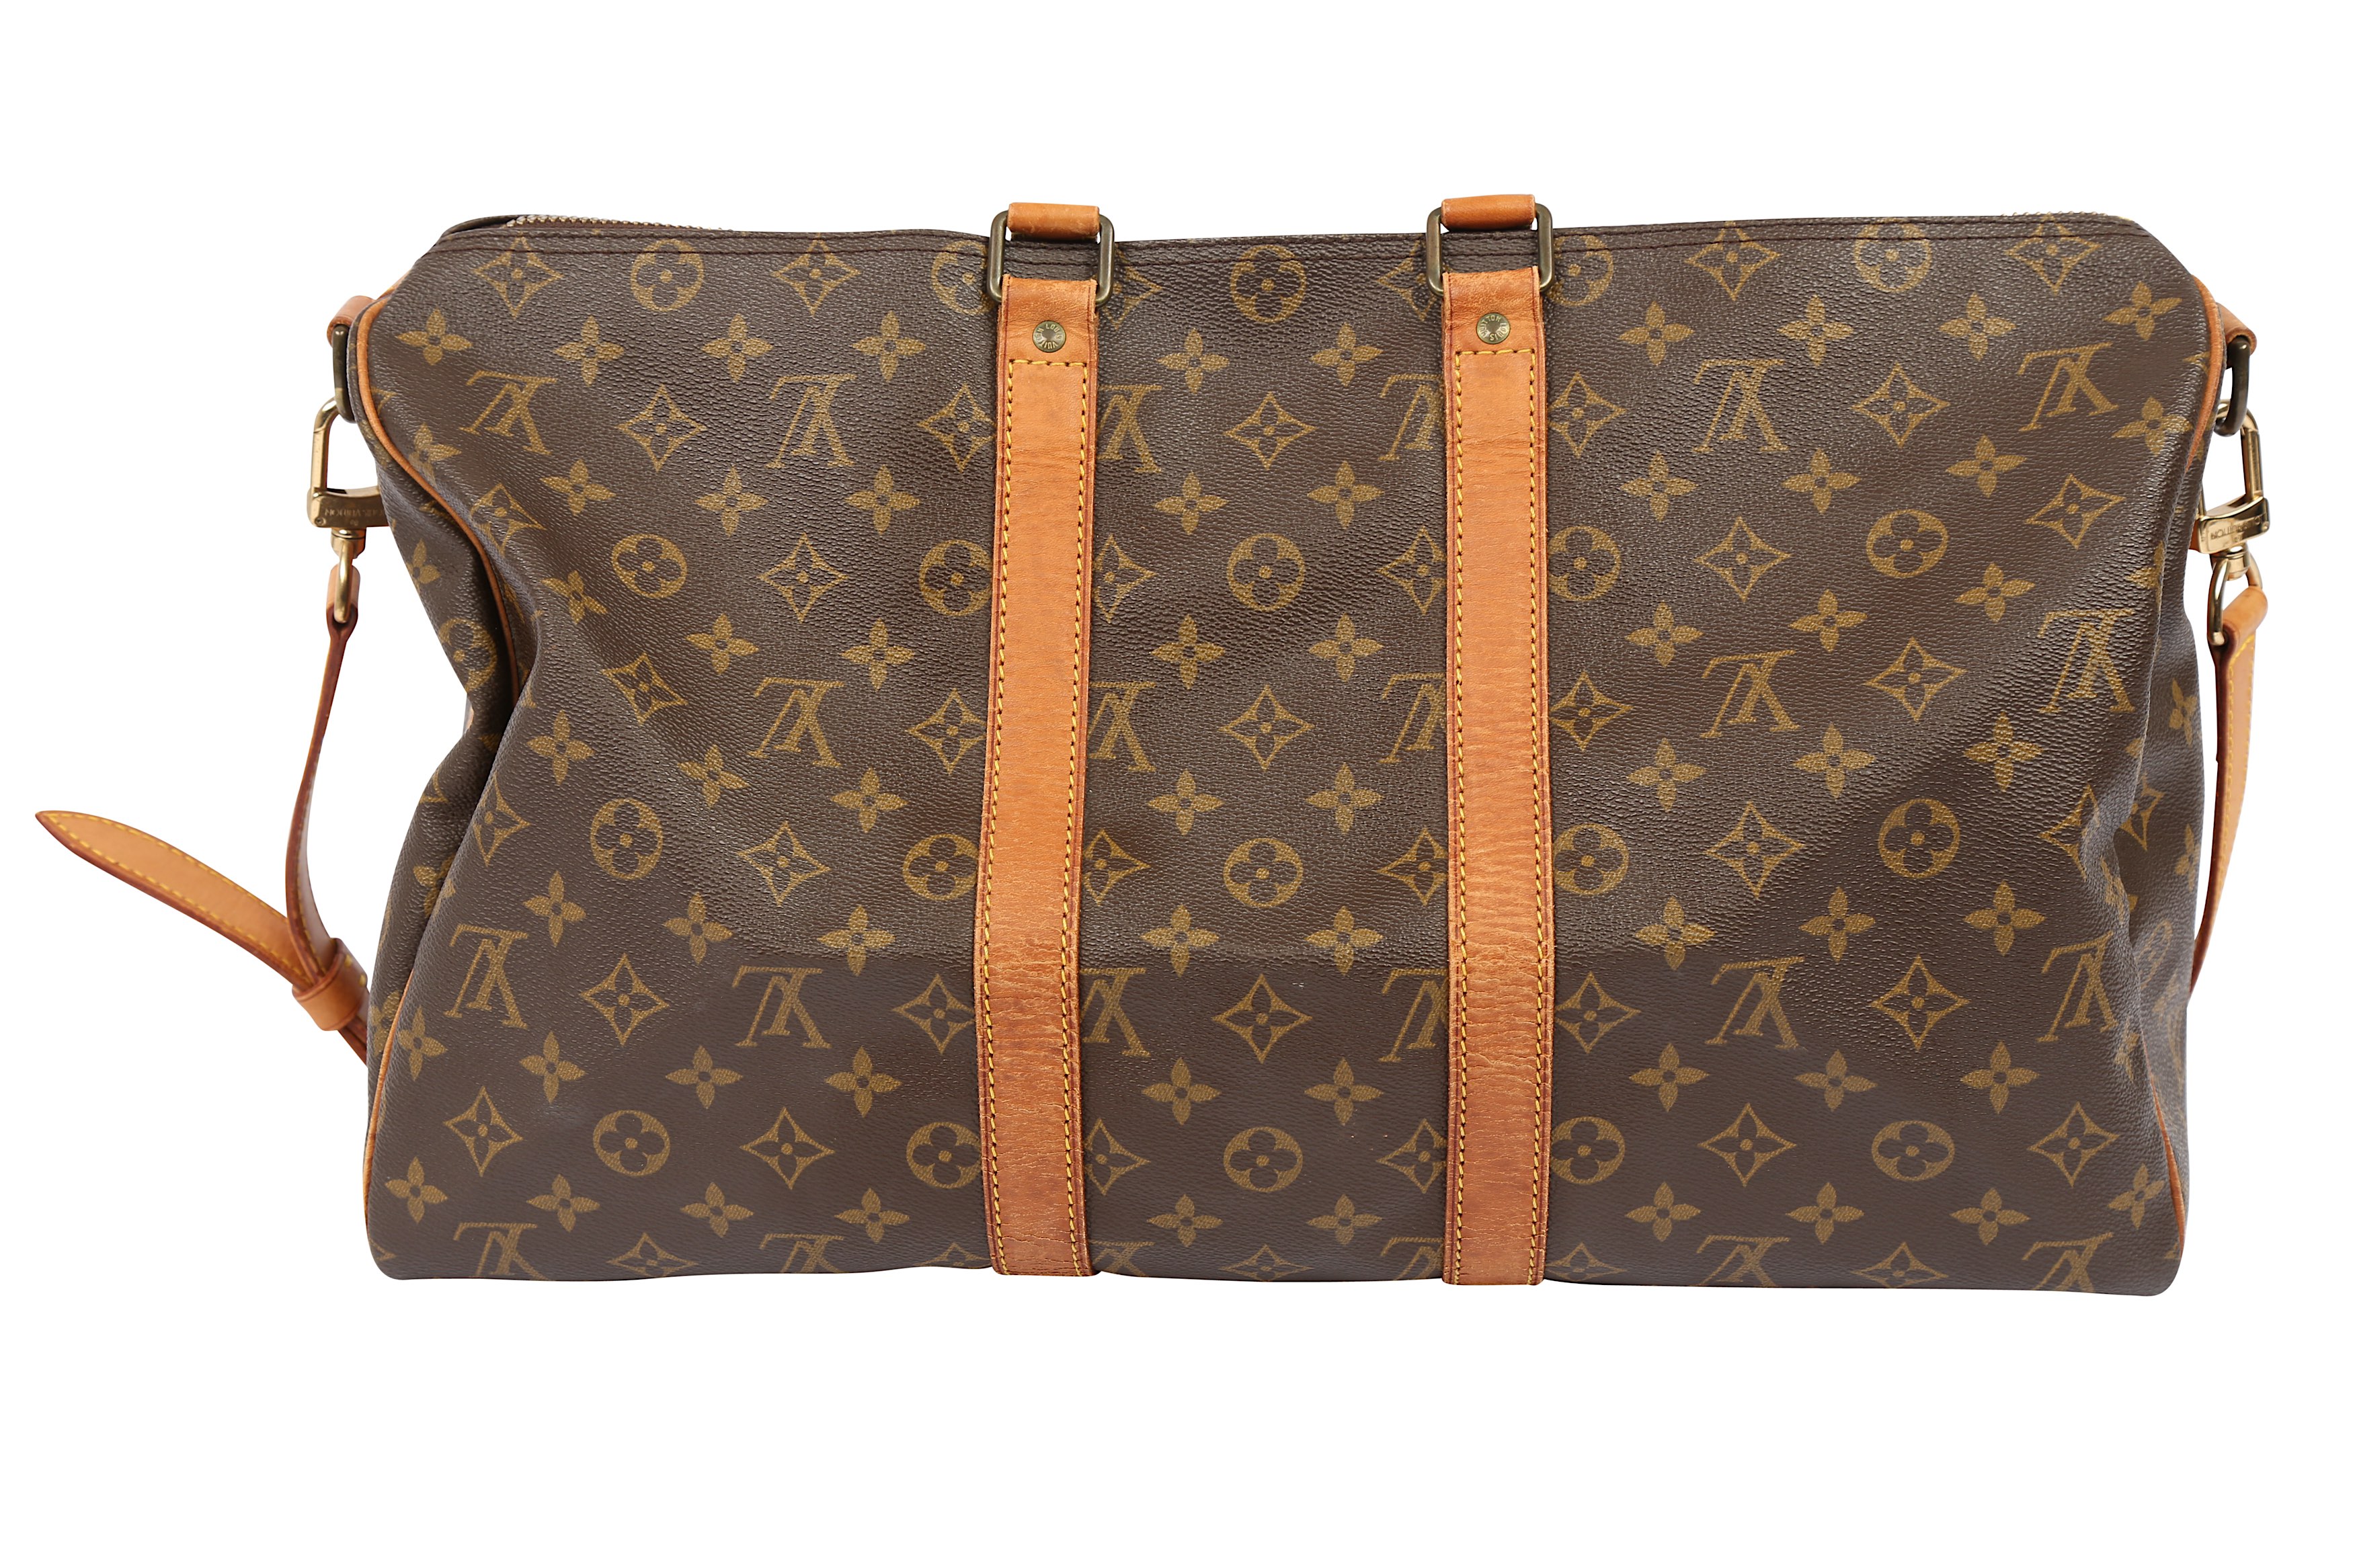 Louis Vuitton Monogram Keepall Bandouliere 45 - Image 2 of 7